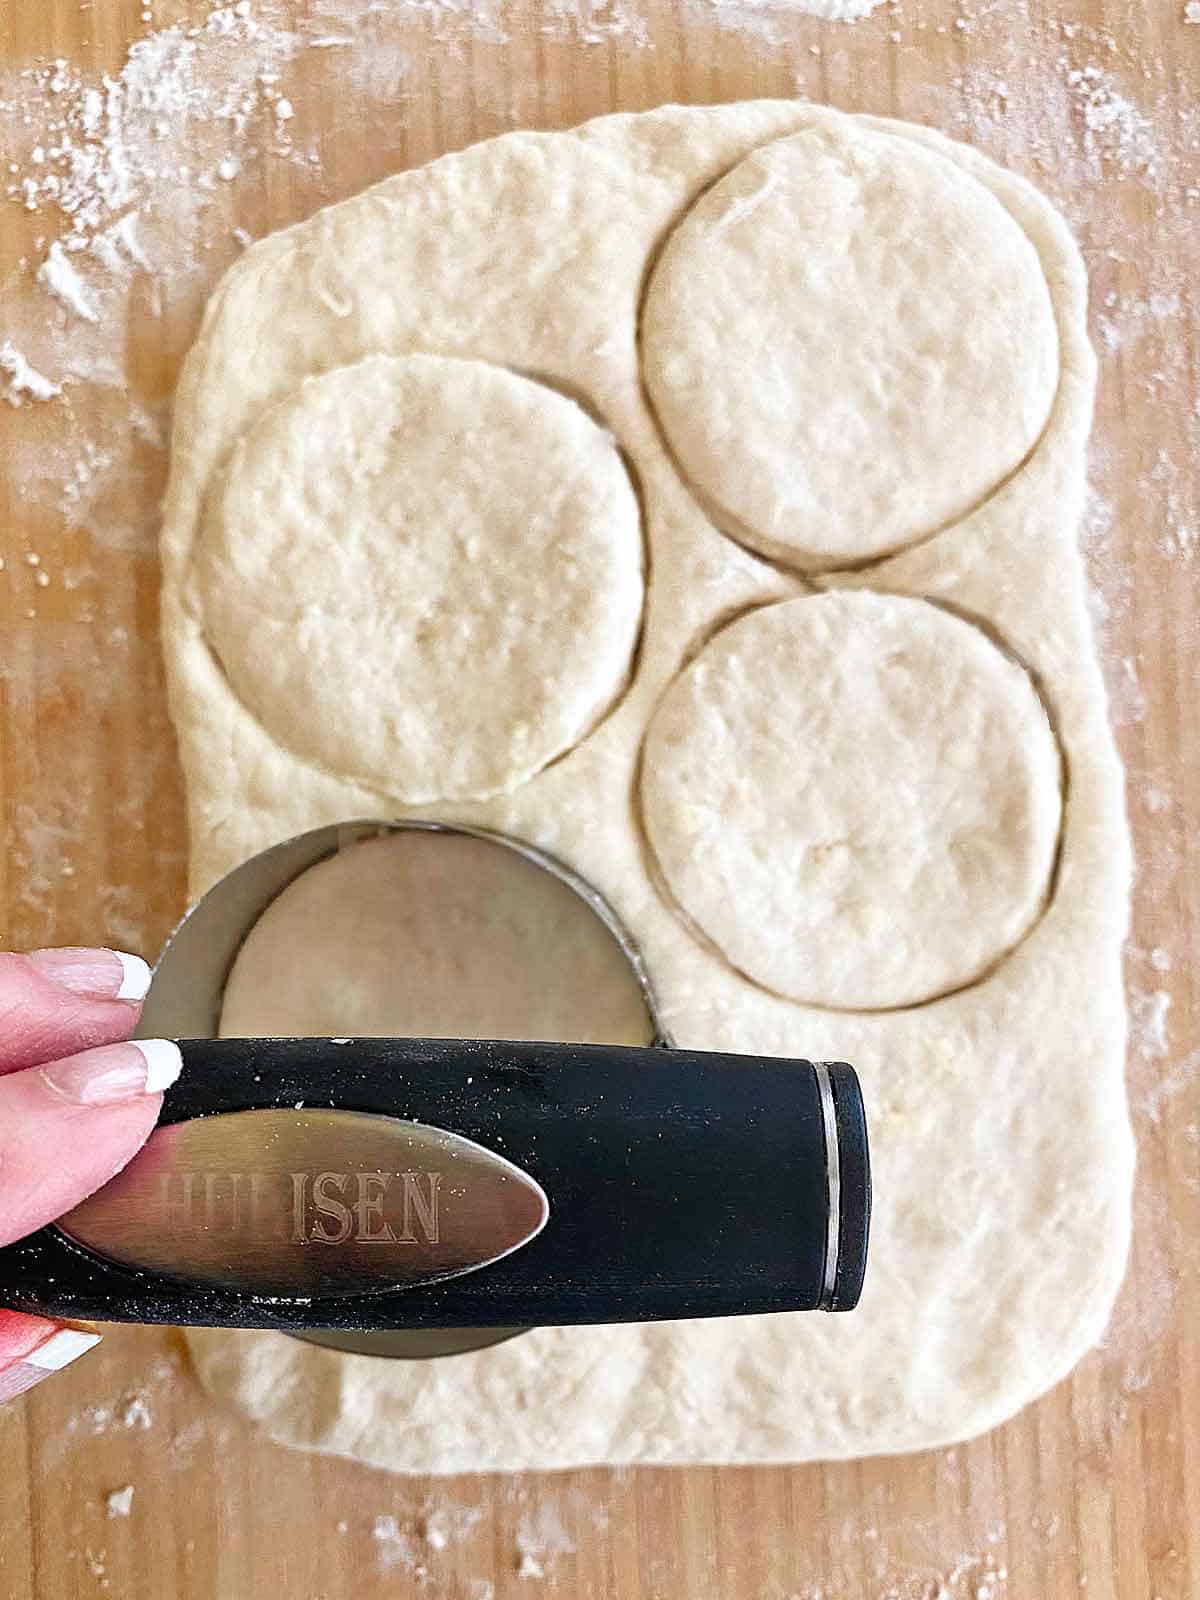 Using a round cutter to cut out biscuits.